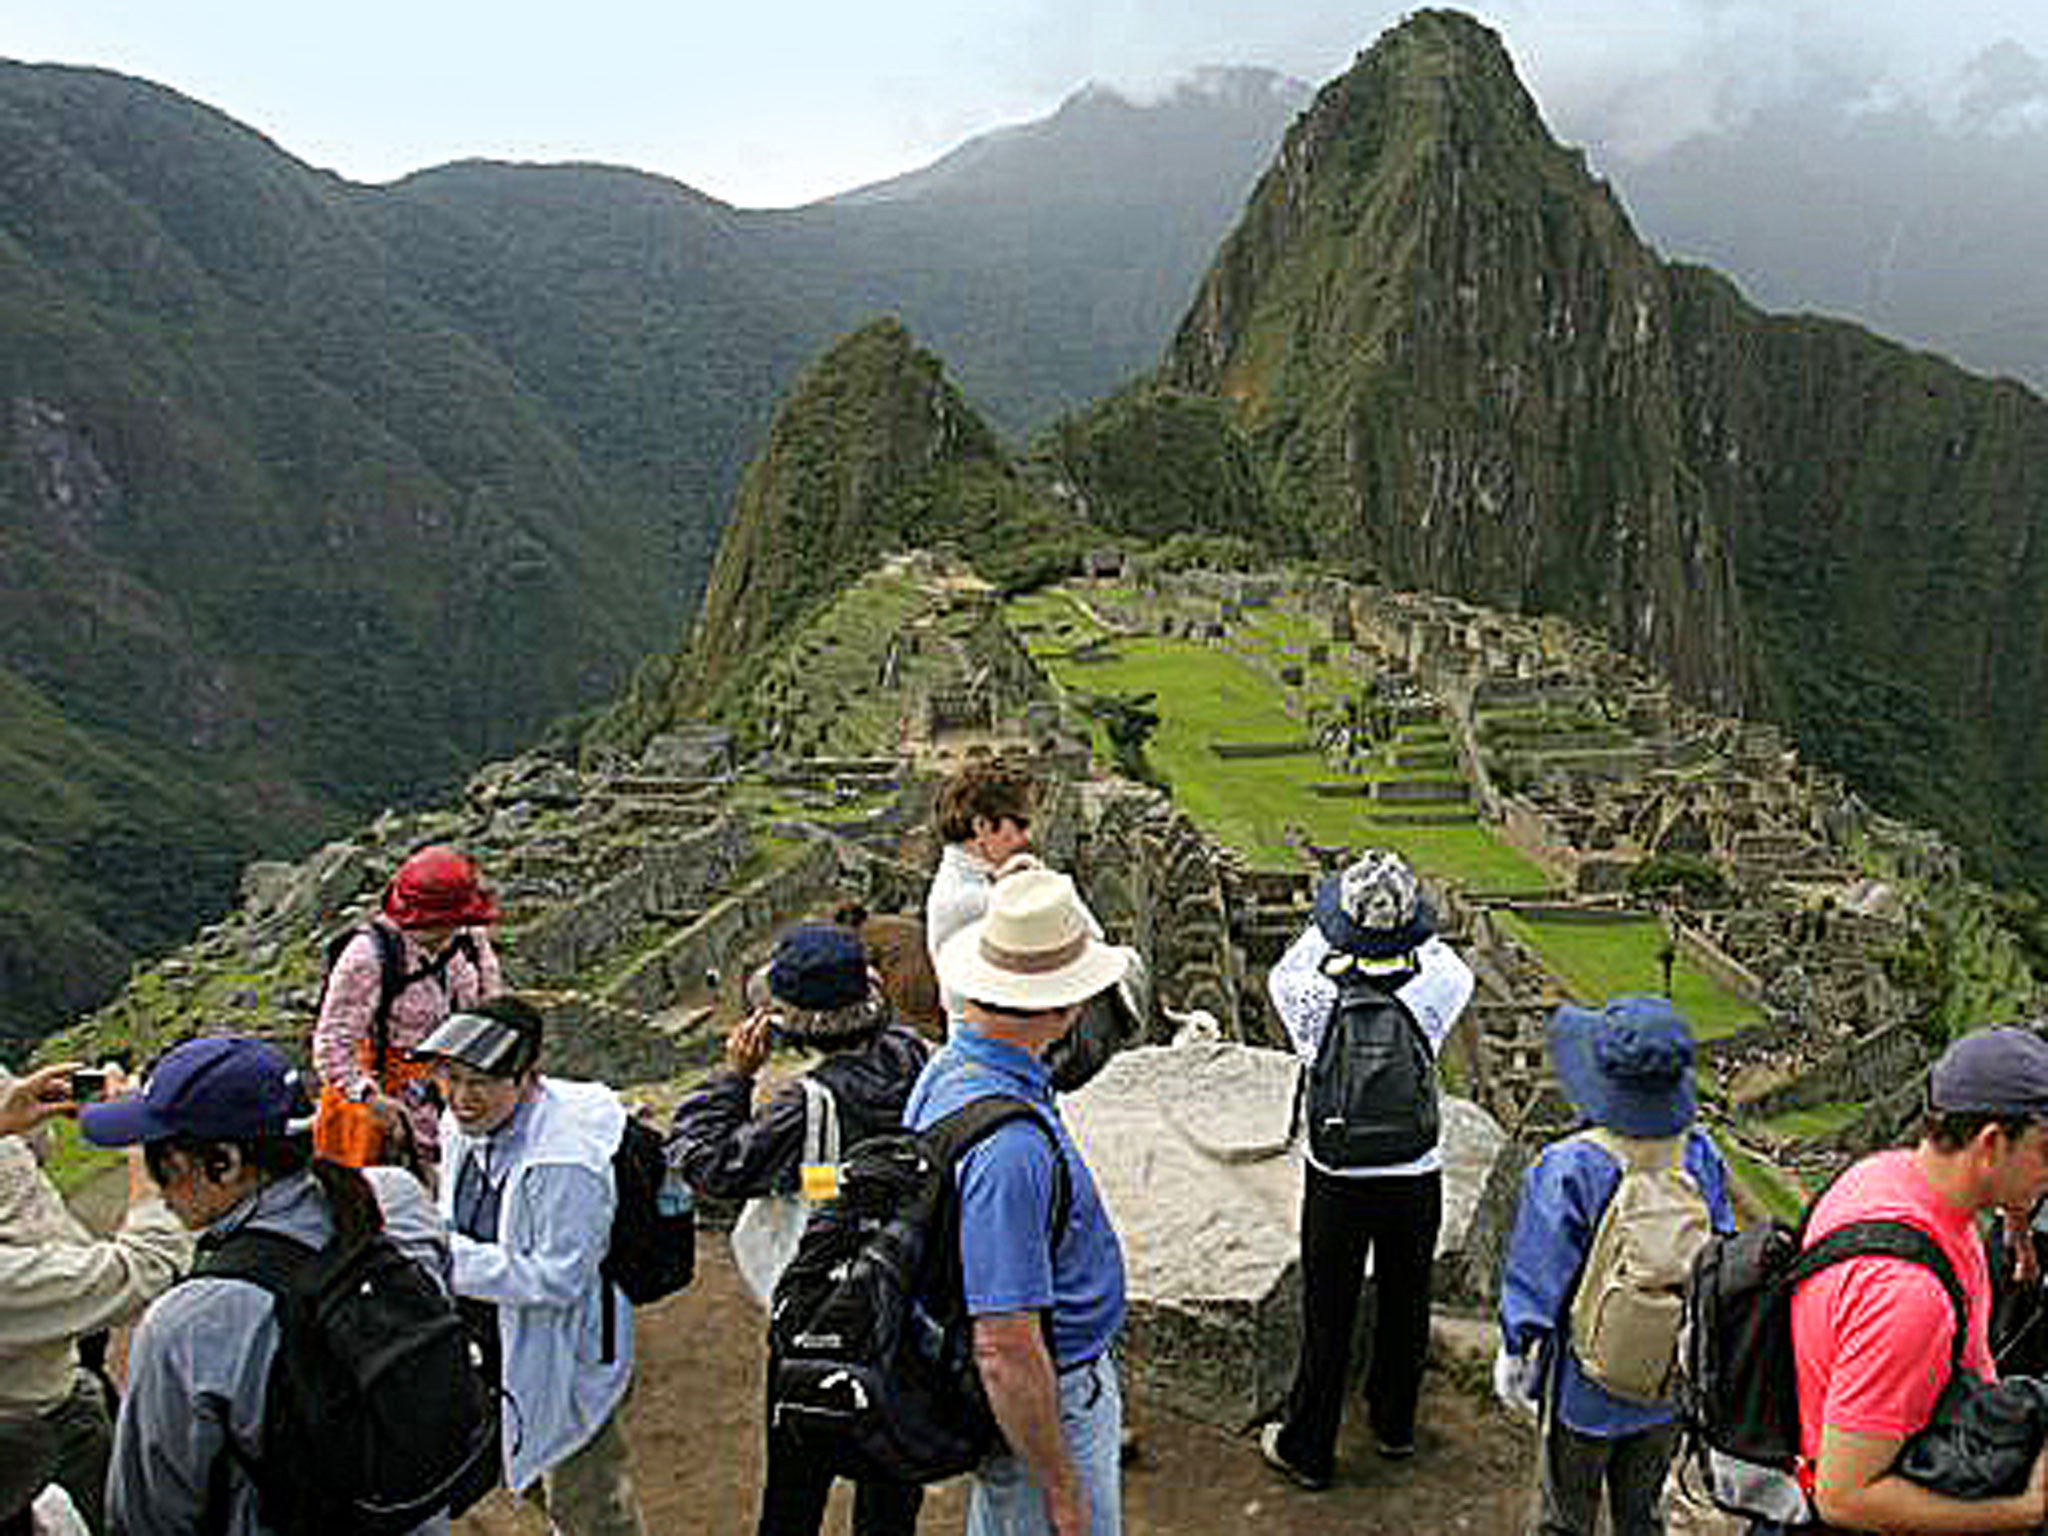 Peak season: the trail to Machu Picchu can be crowded with mobile-wielding tourists